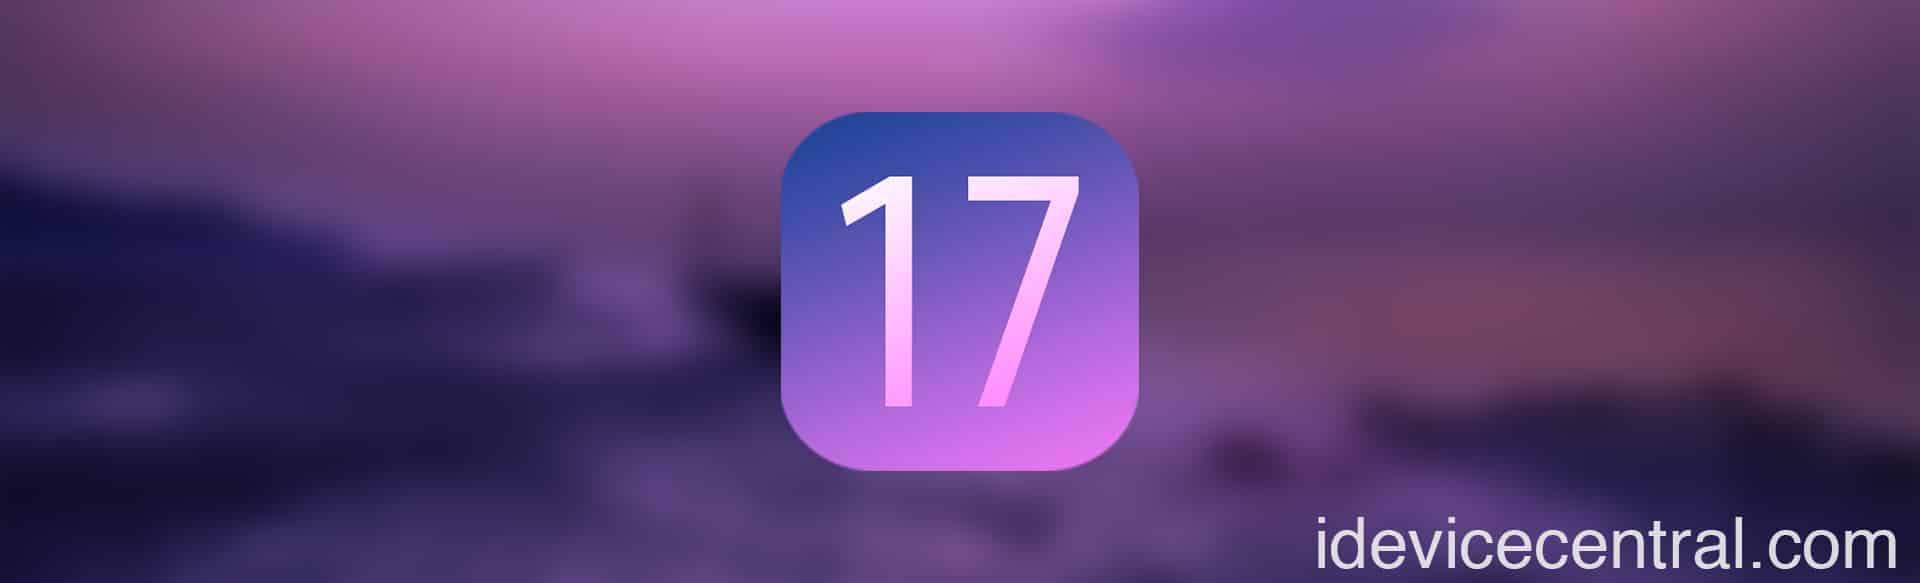 iOS 17 Release Date, Compatibility and Confirmed Features from WWDC23